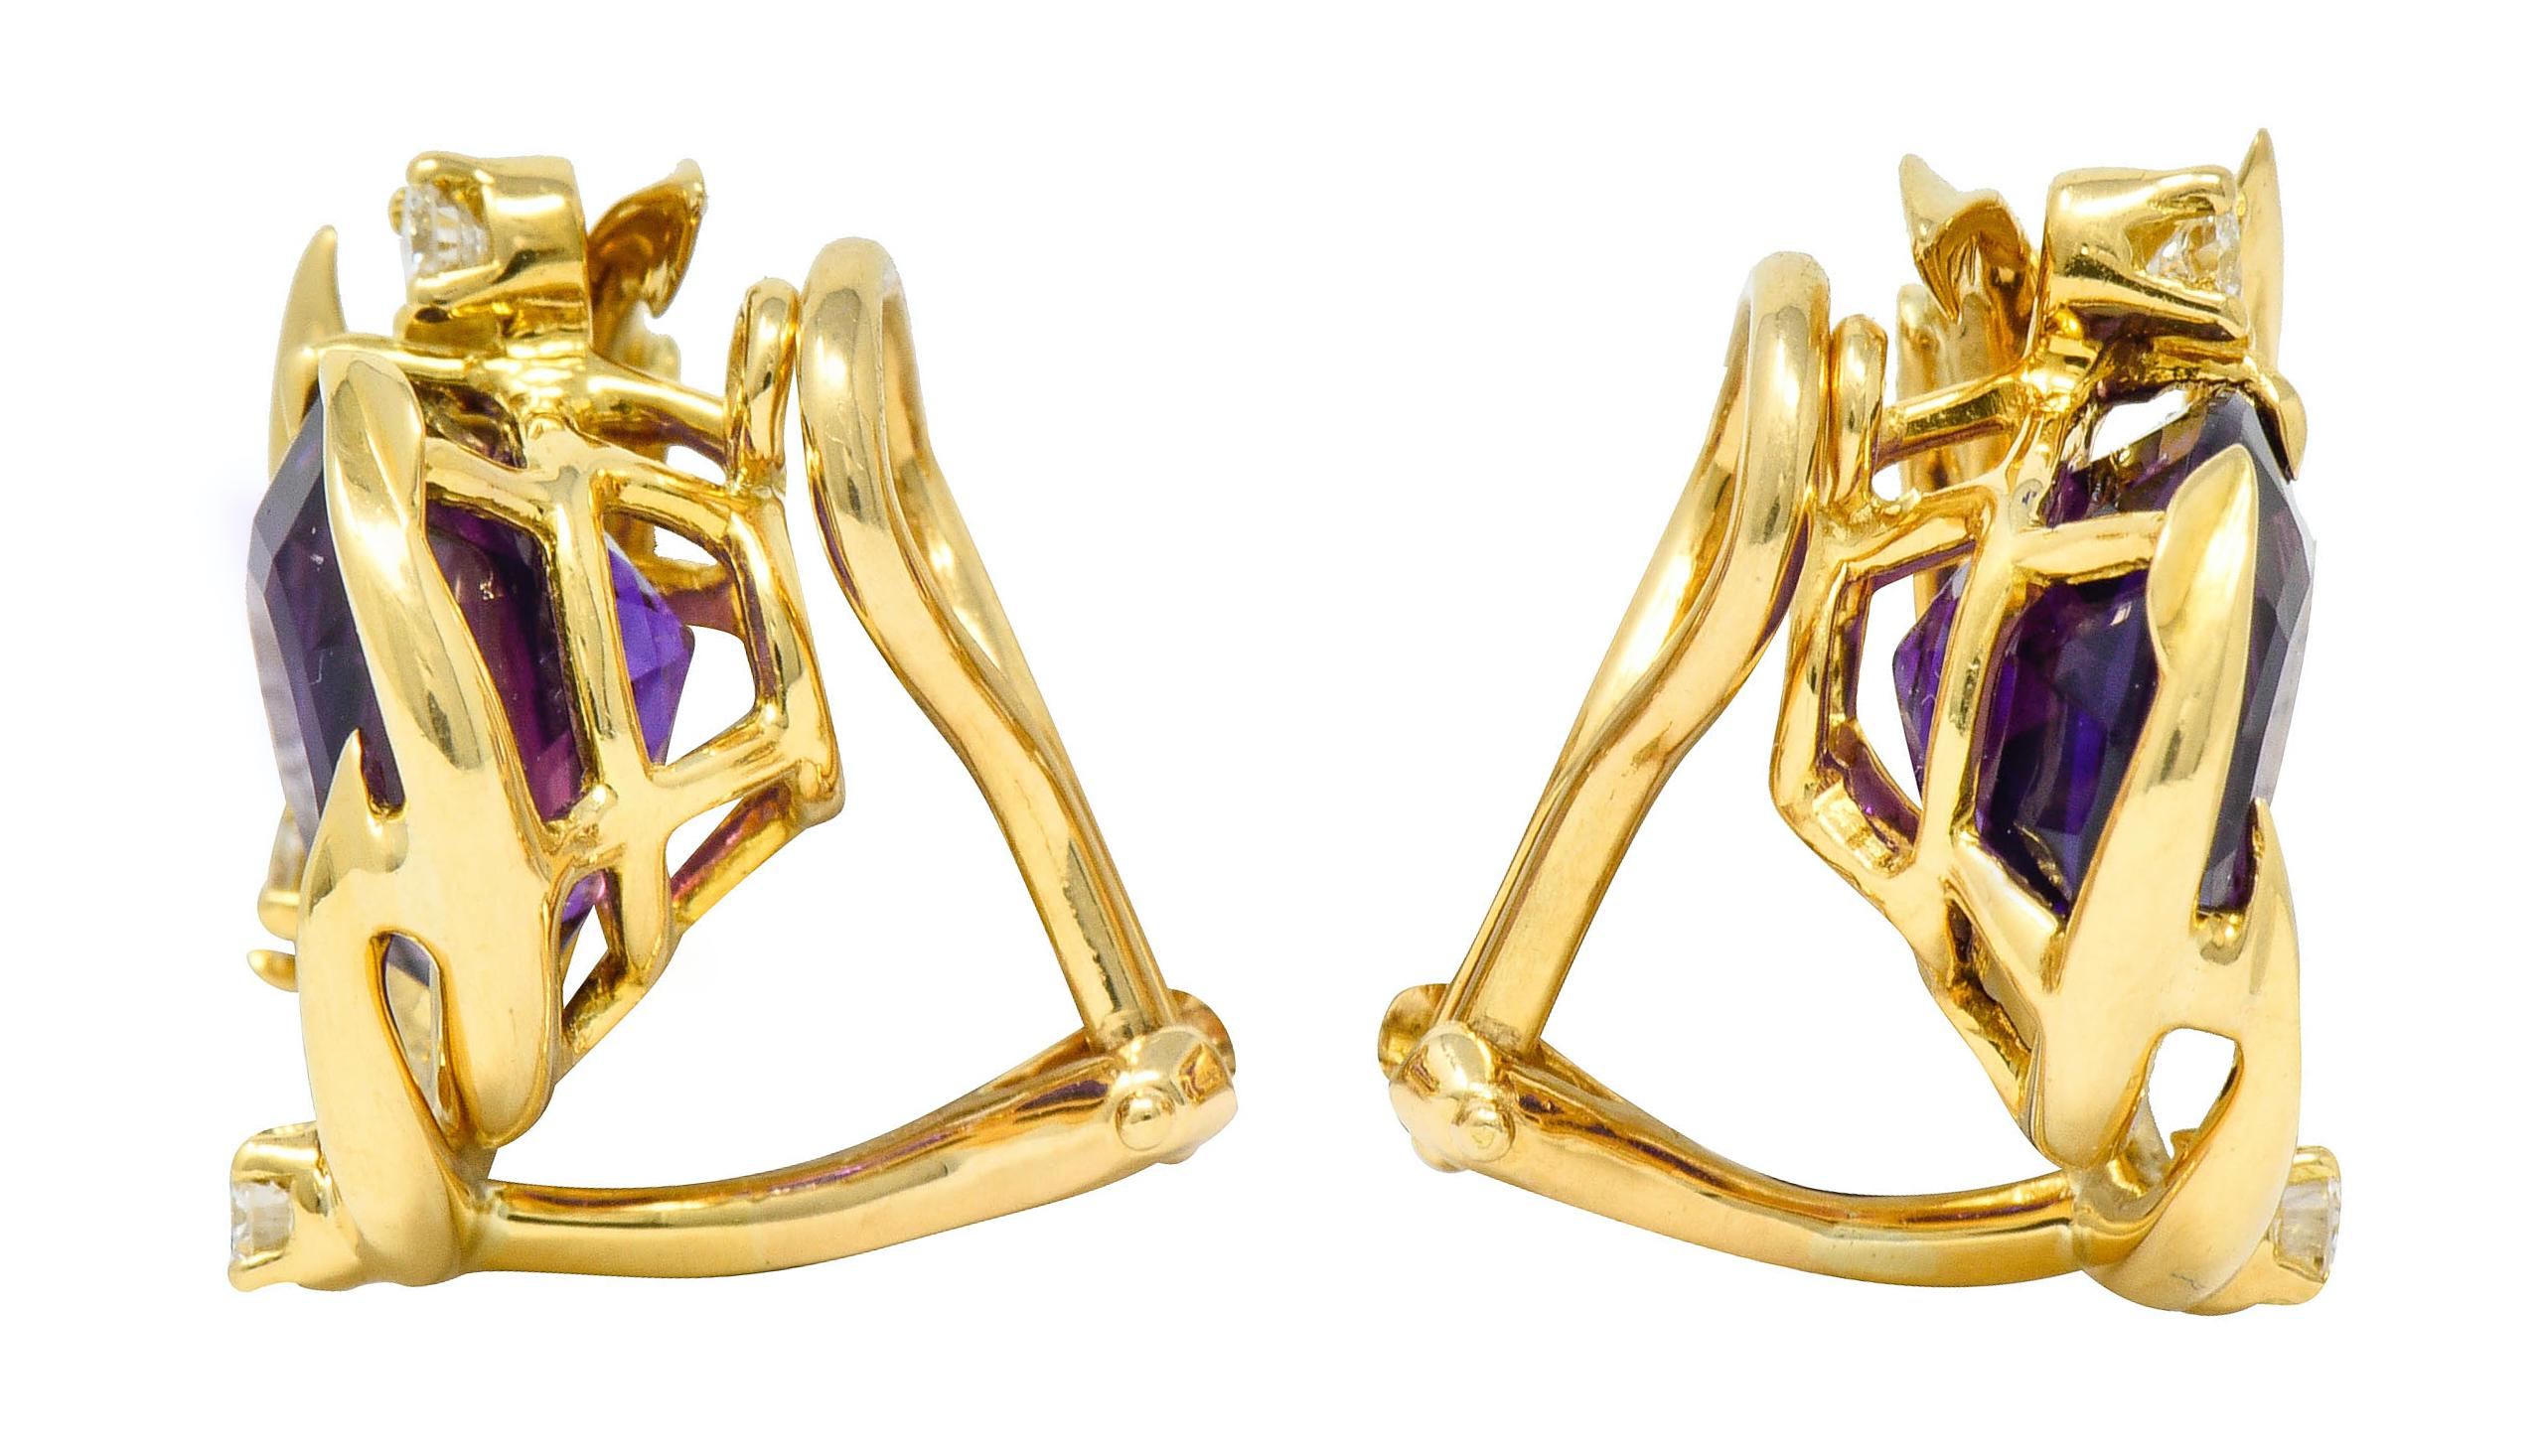 Earrings each center a 10.0 mm round cut amethyst; very well-matched and medium-dark purple in color

With vine-like polished gold segments as a partial surround

Accented by round brilliant cut diamonds weighing in total approximately 0.36 carat;